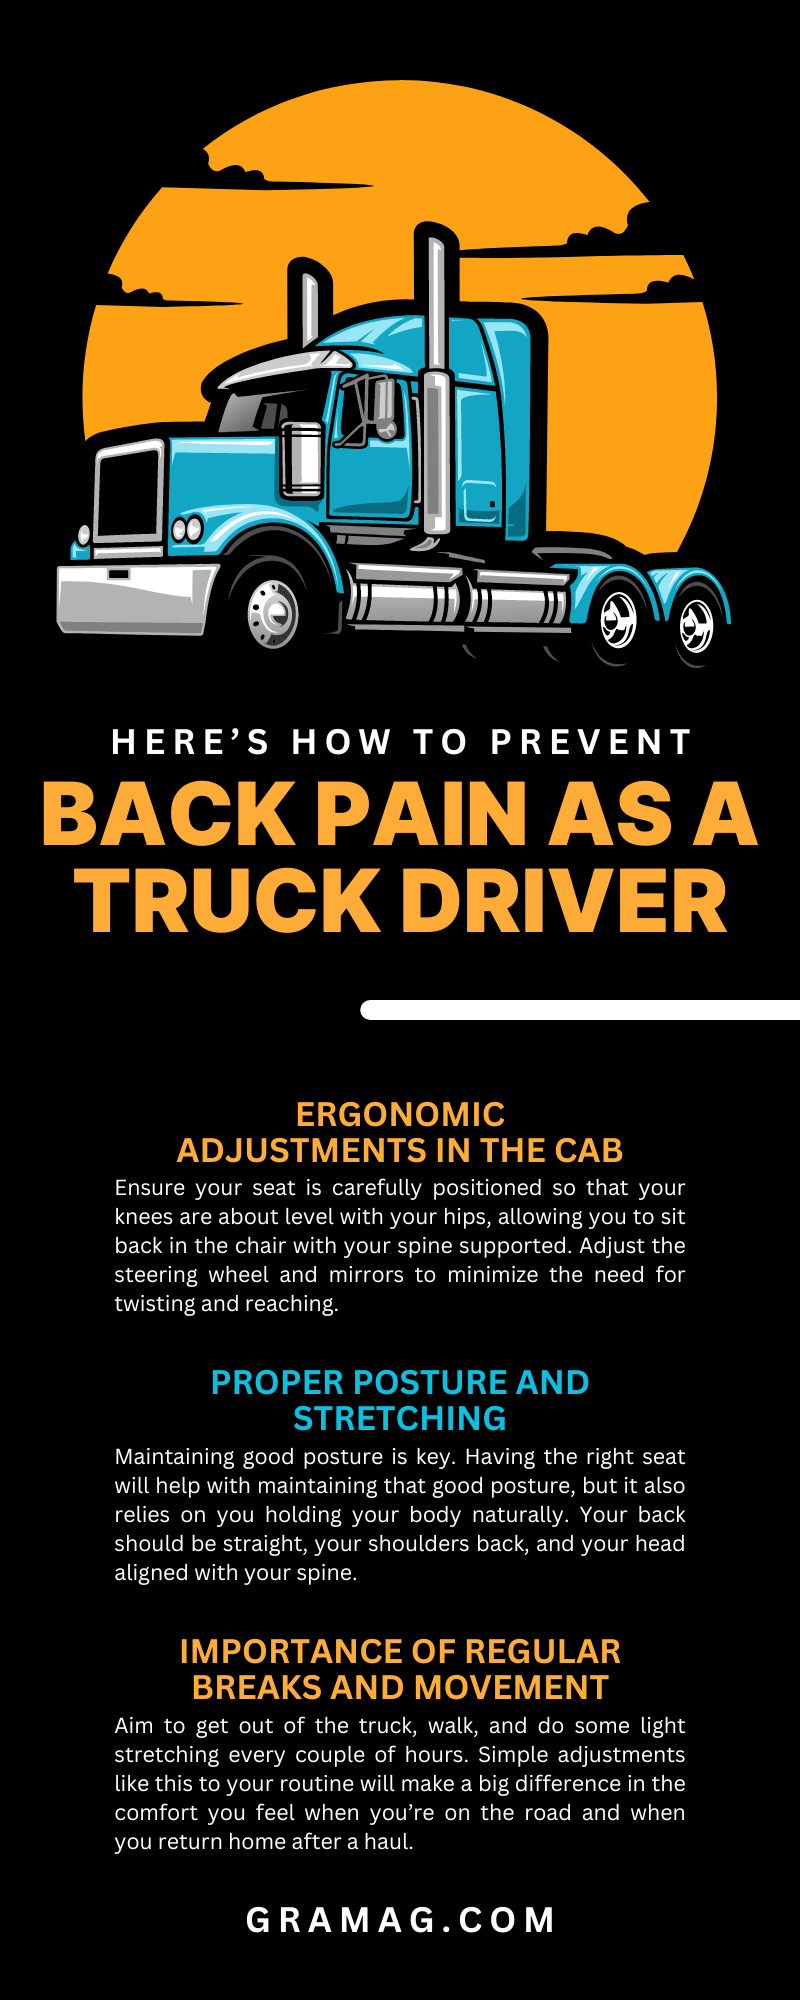 Here’s How To Prevent Back Pain as a Truck Driver